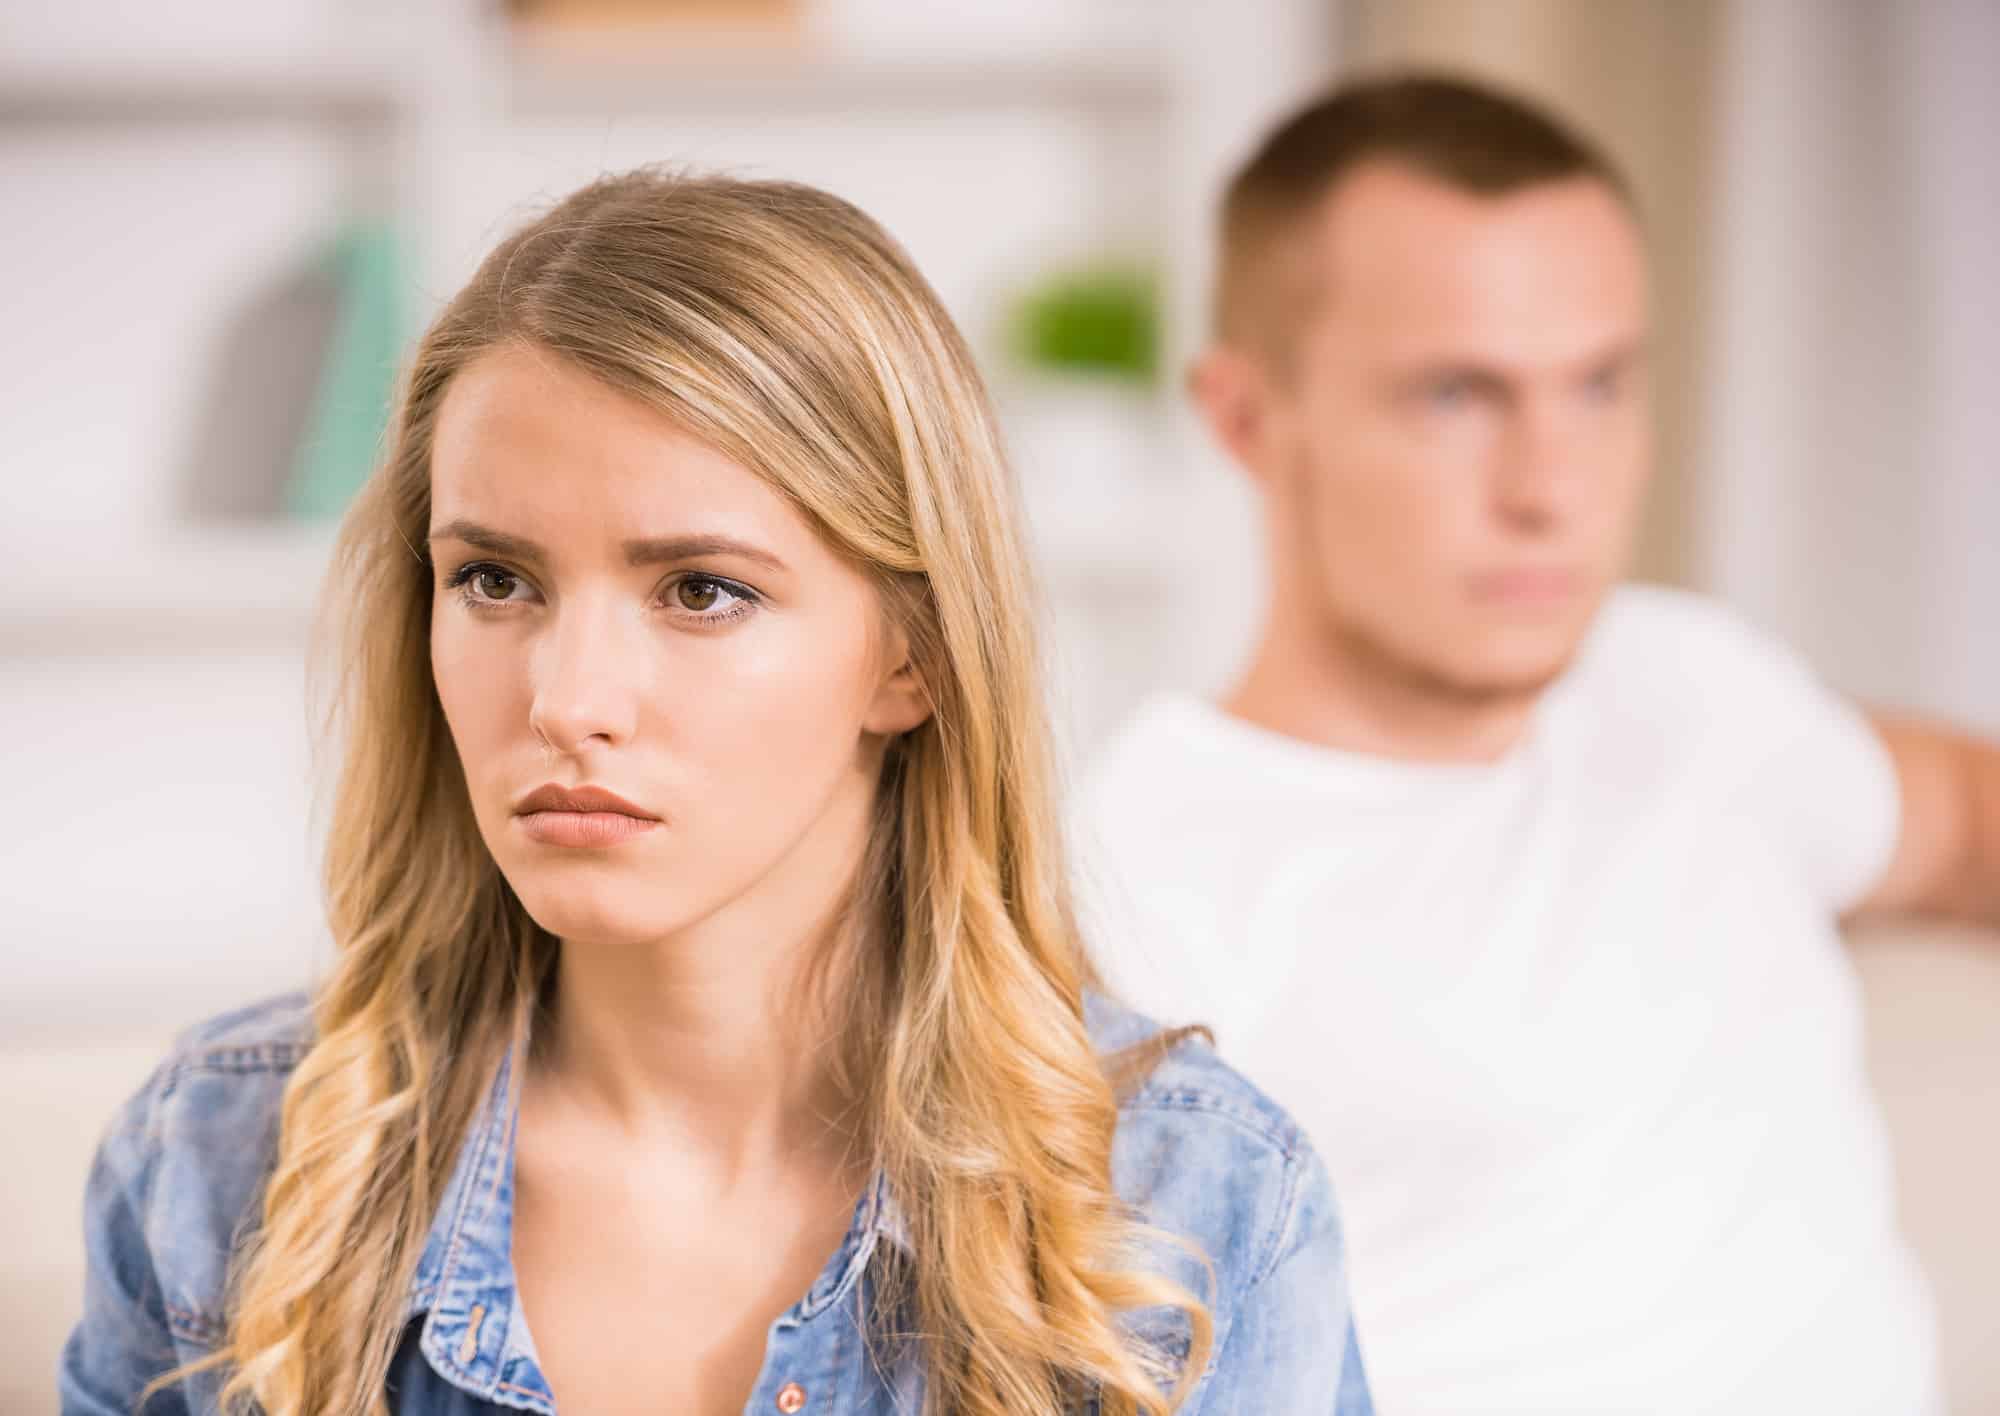 What to do when your husband hurts your feelings